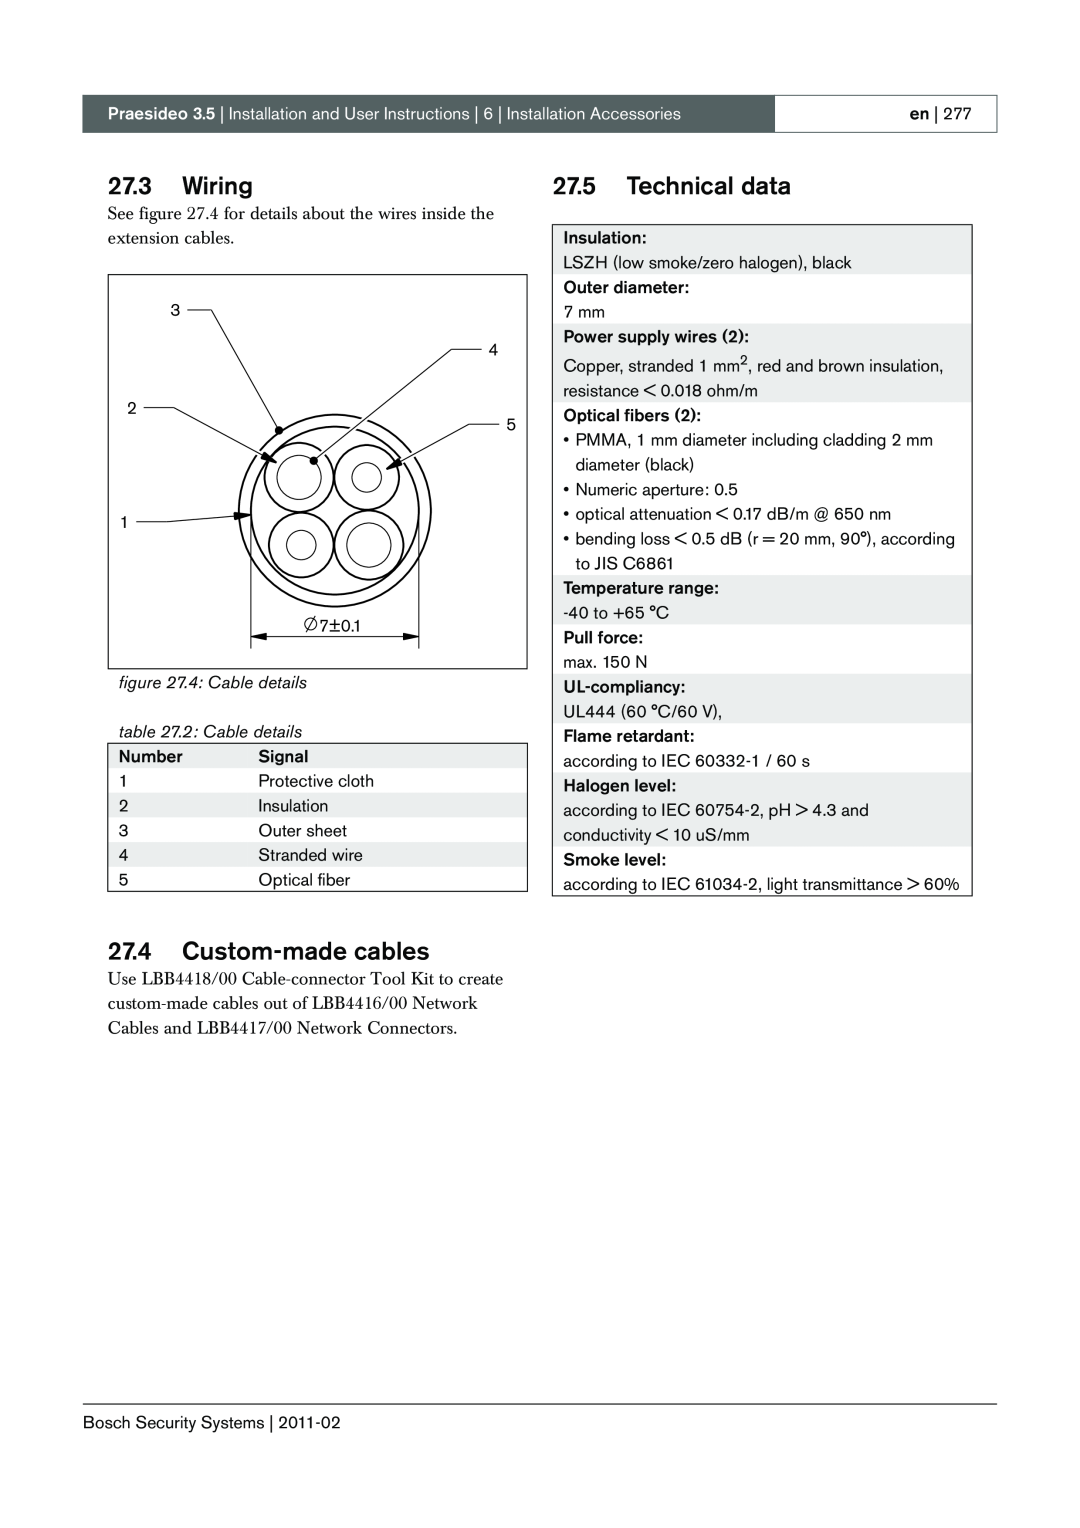 Bosch Appliances 3.5 manual 27.3Wiring, 27.5Technical data, 27.4Custom-madecables, 4: Cable details, 2: Cable details 